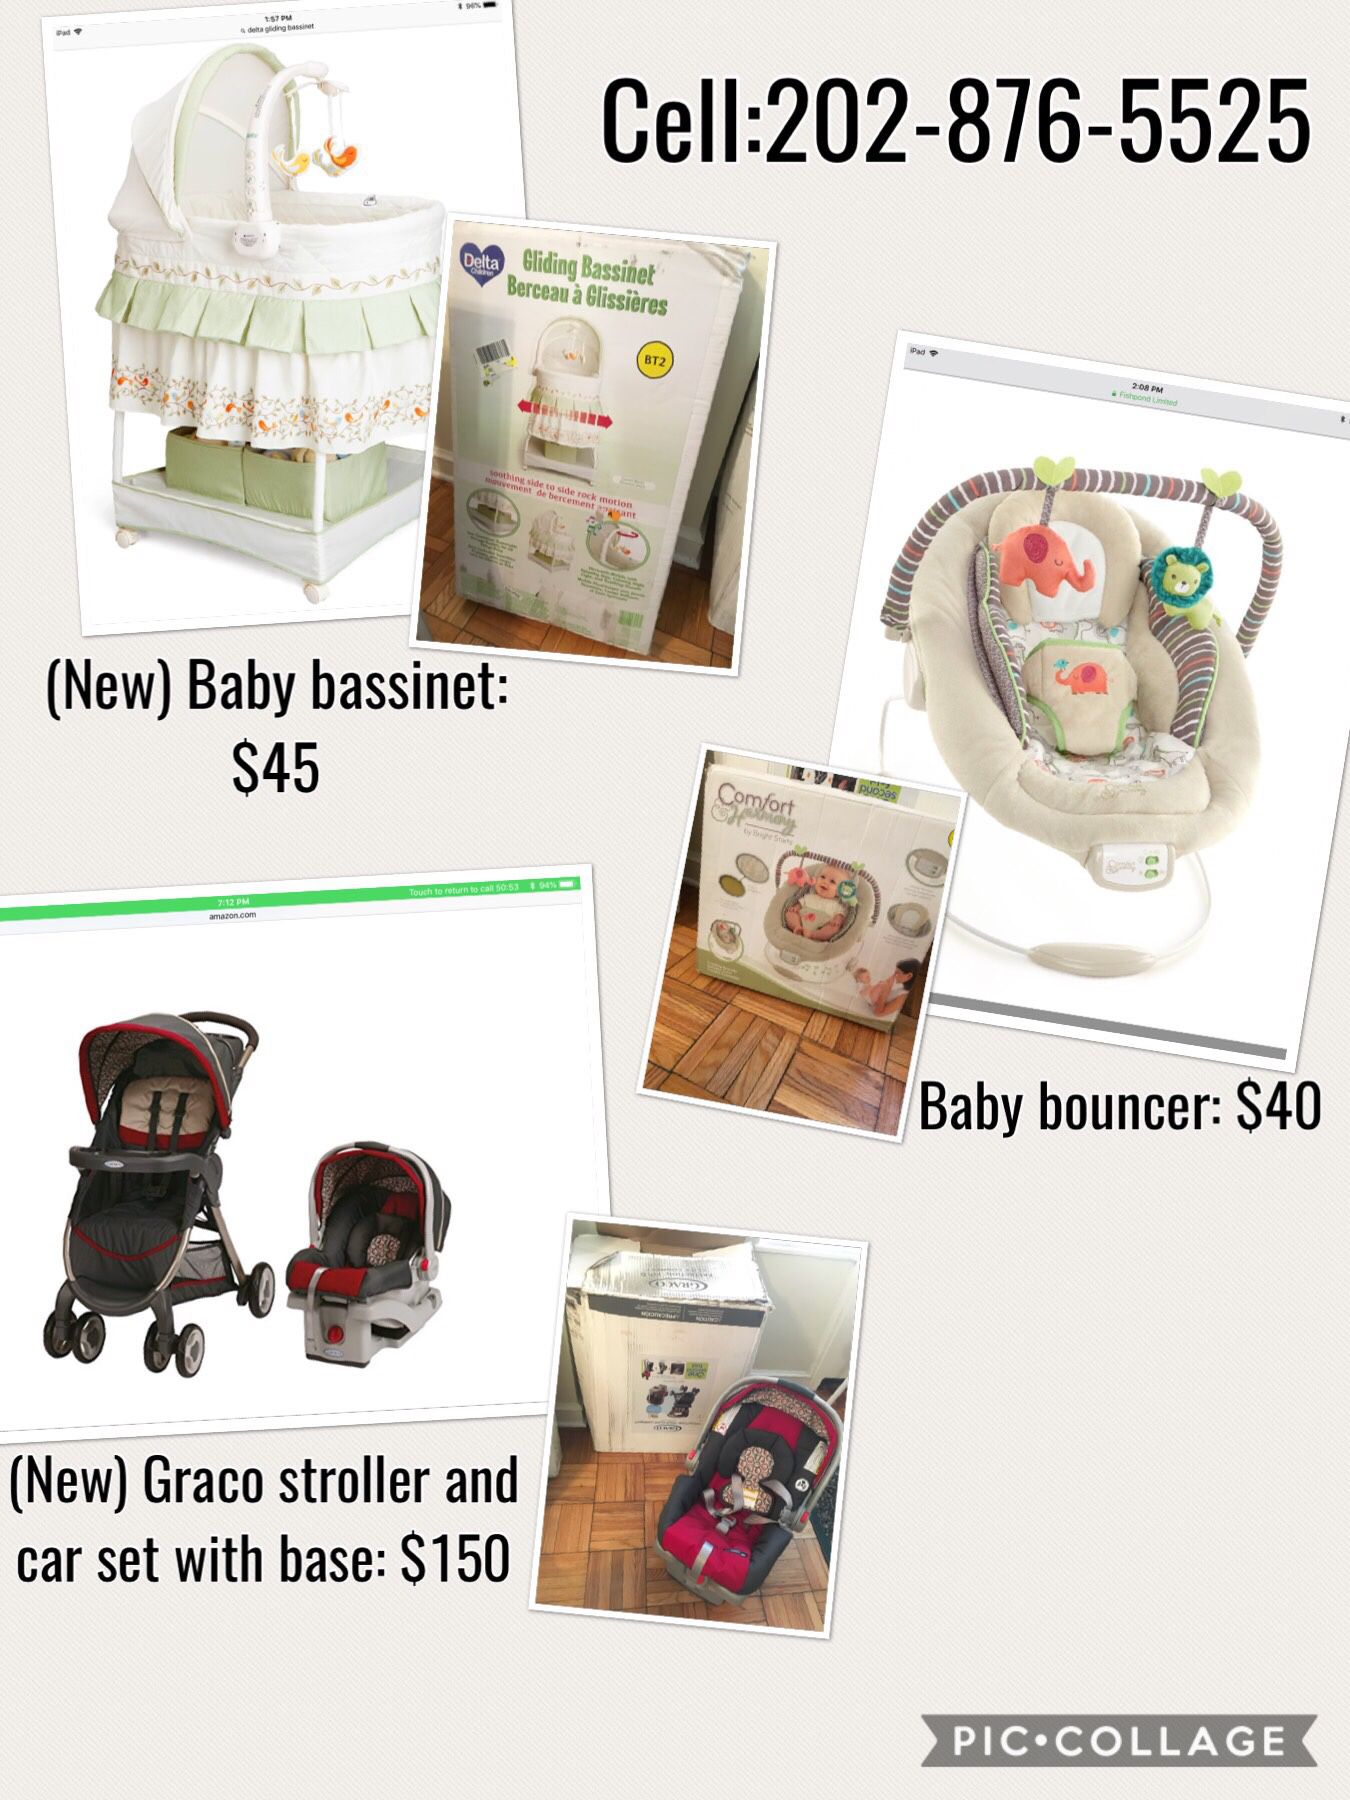 Gliding bassinet, bouncer and stroller with infant car seat with base